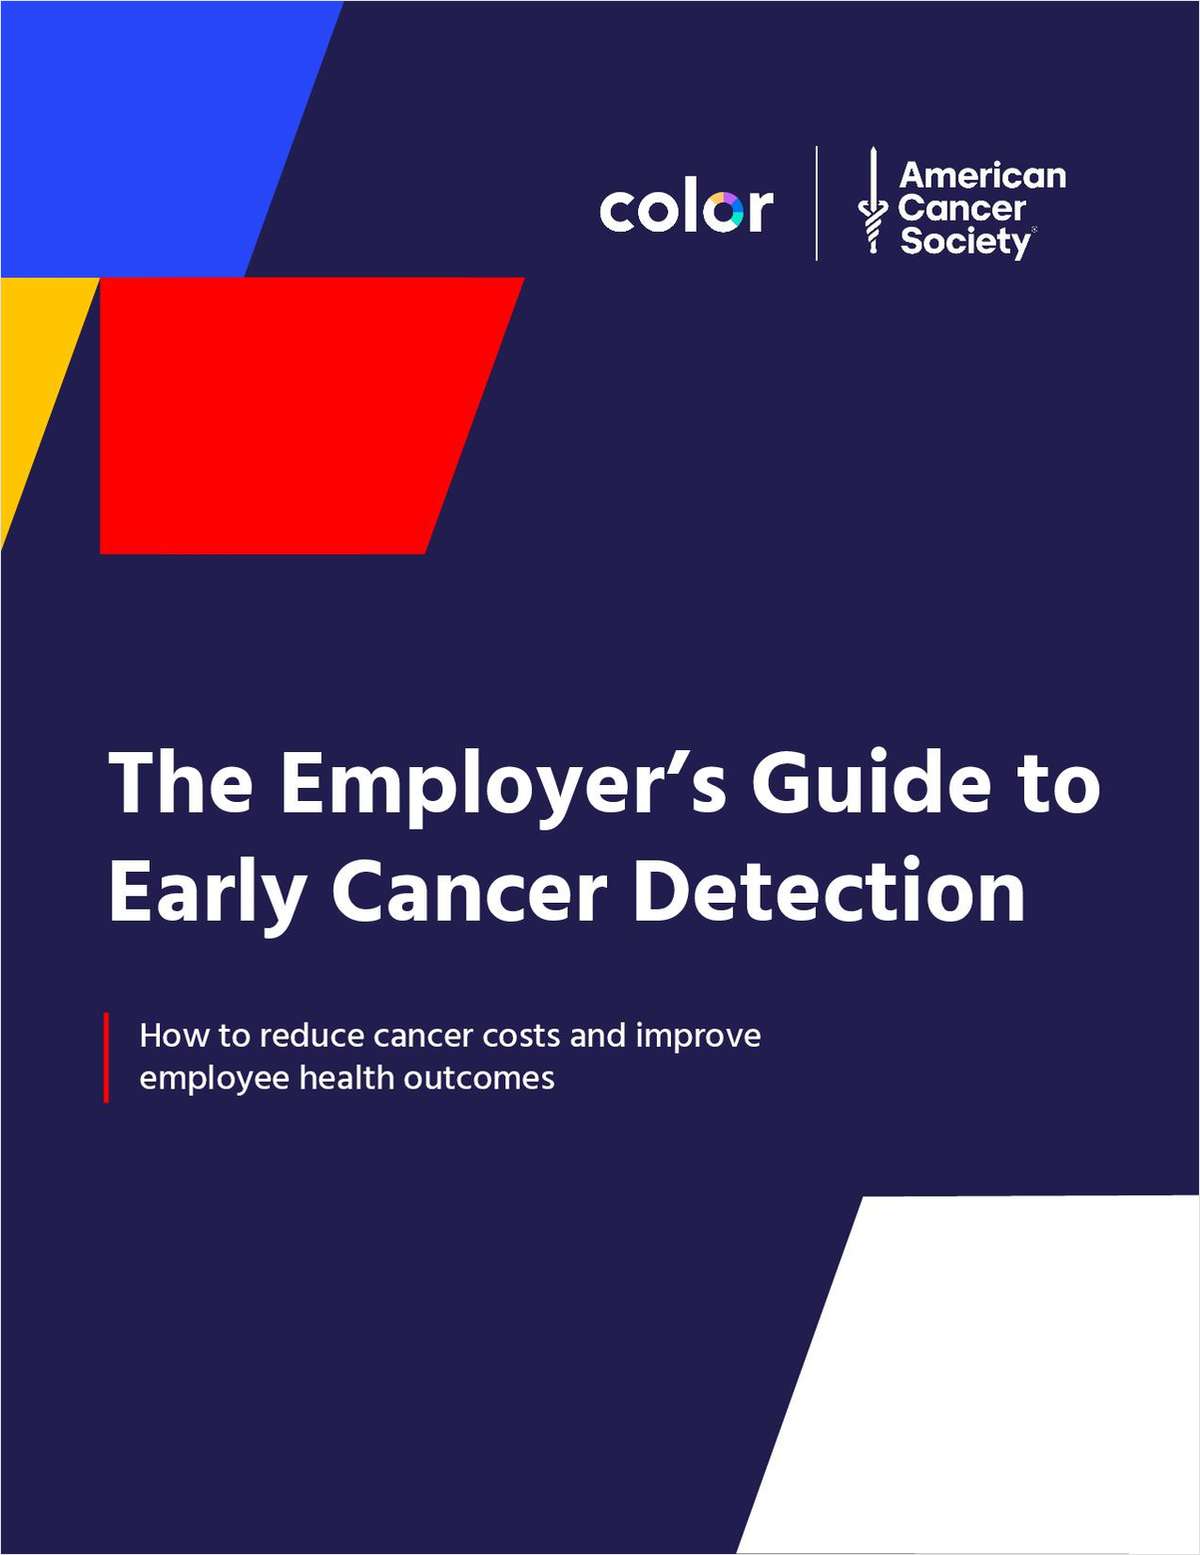 The Employer's Guide to Early Cancer Detection: How to Reduce Cancer Costs and Improve Employee Health Outcomes